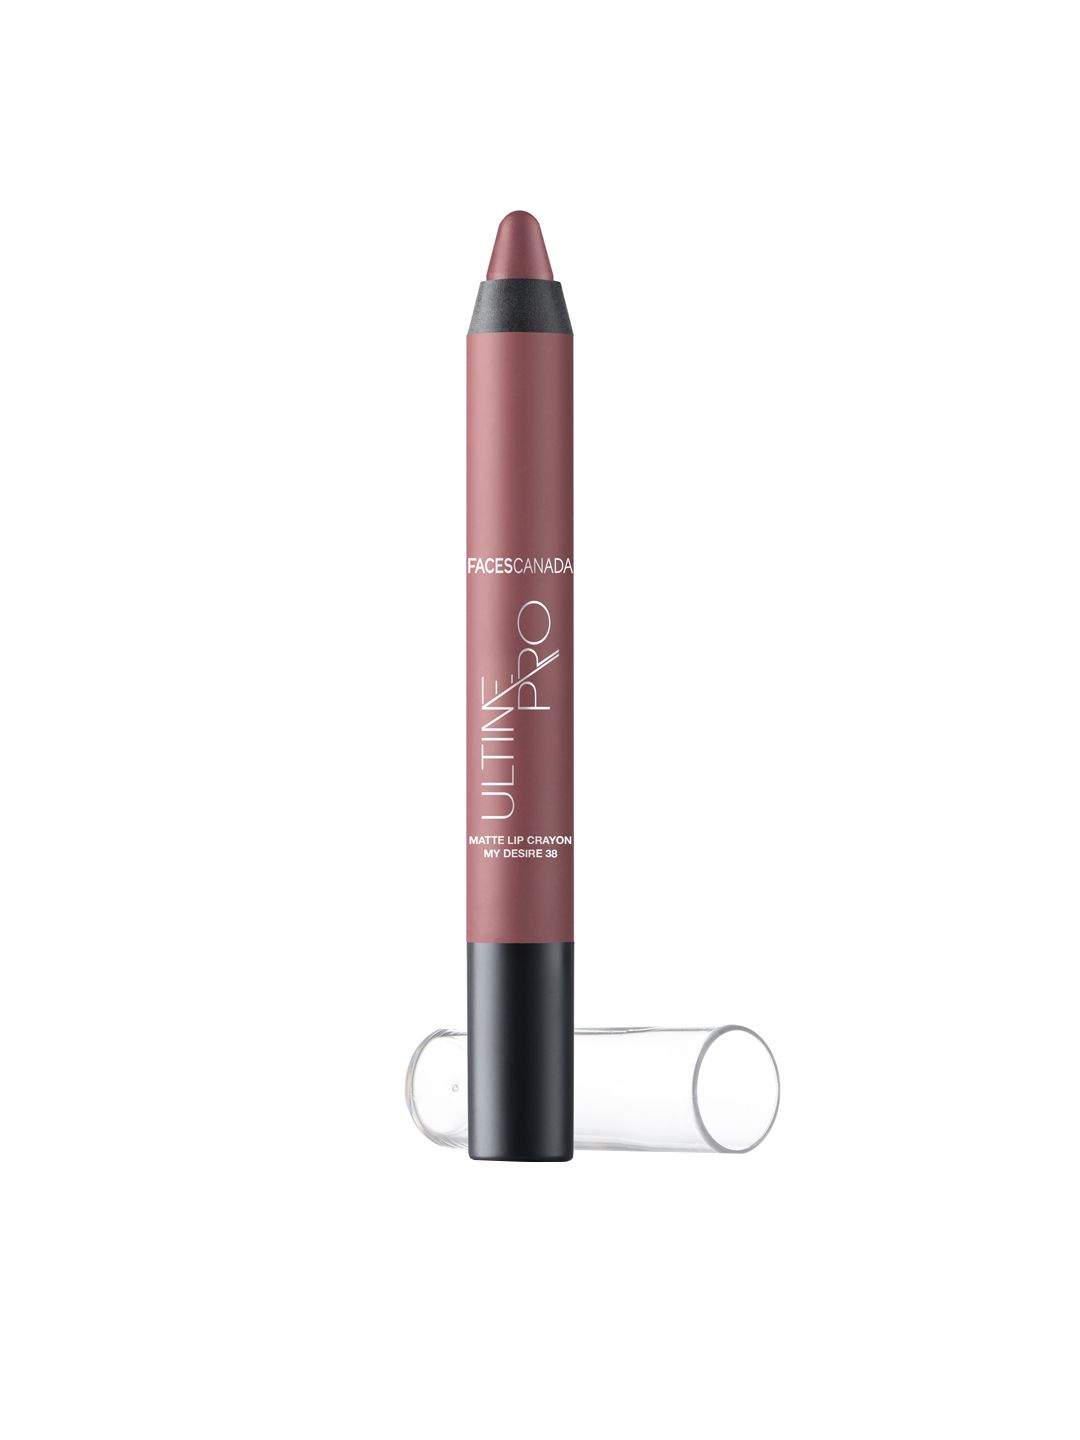 FACES CANADA Ultime 38 My Desire Pro Matte Lip Crayon With Sharpener 2.8g Price in India